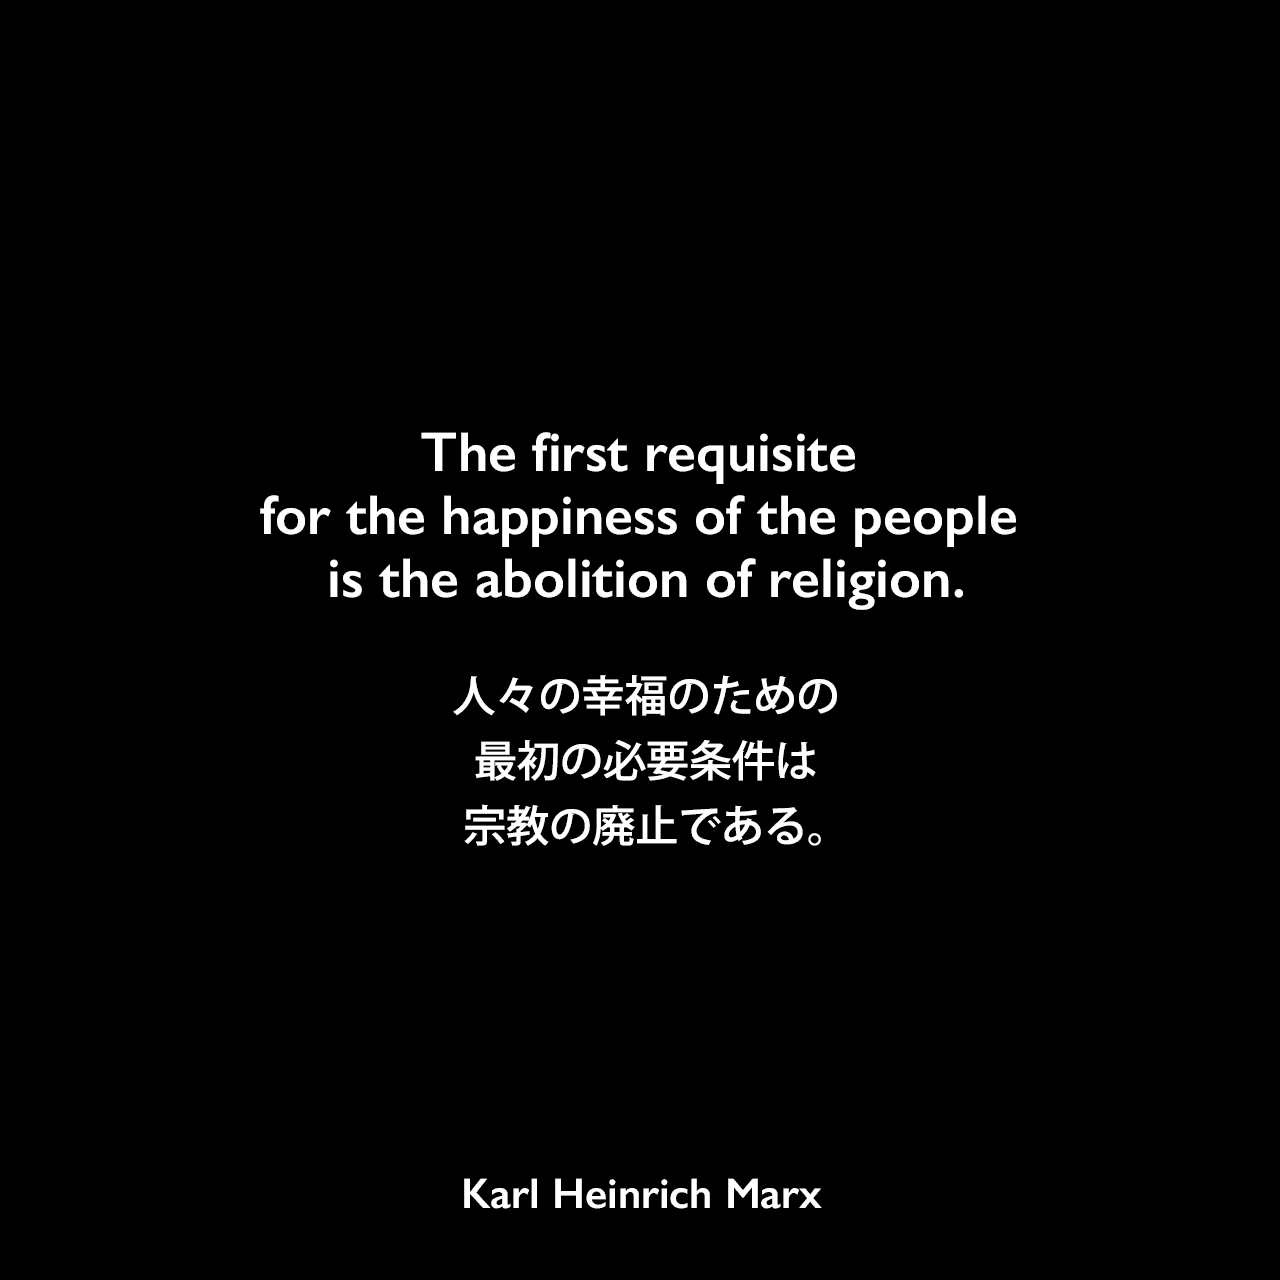 The first requisite for the happiness of the people is the abolition of religion.人々の幸福のための最初の必要条件は、宗教の廃止である。Karl Heinrich Marx